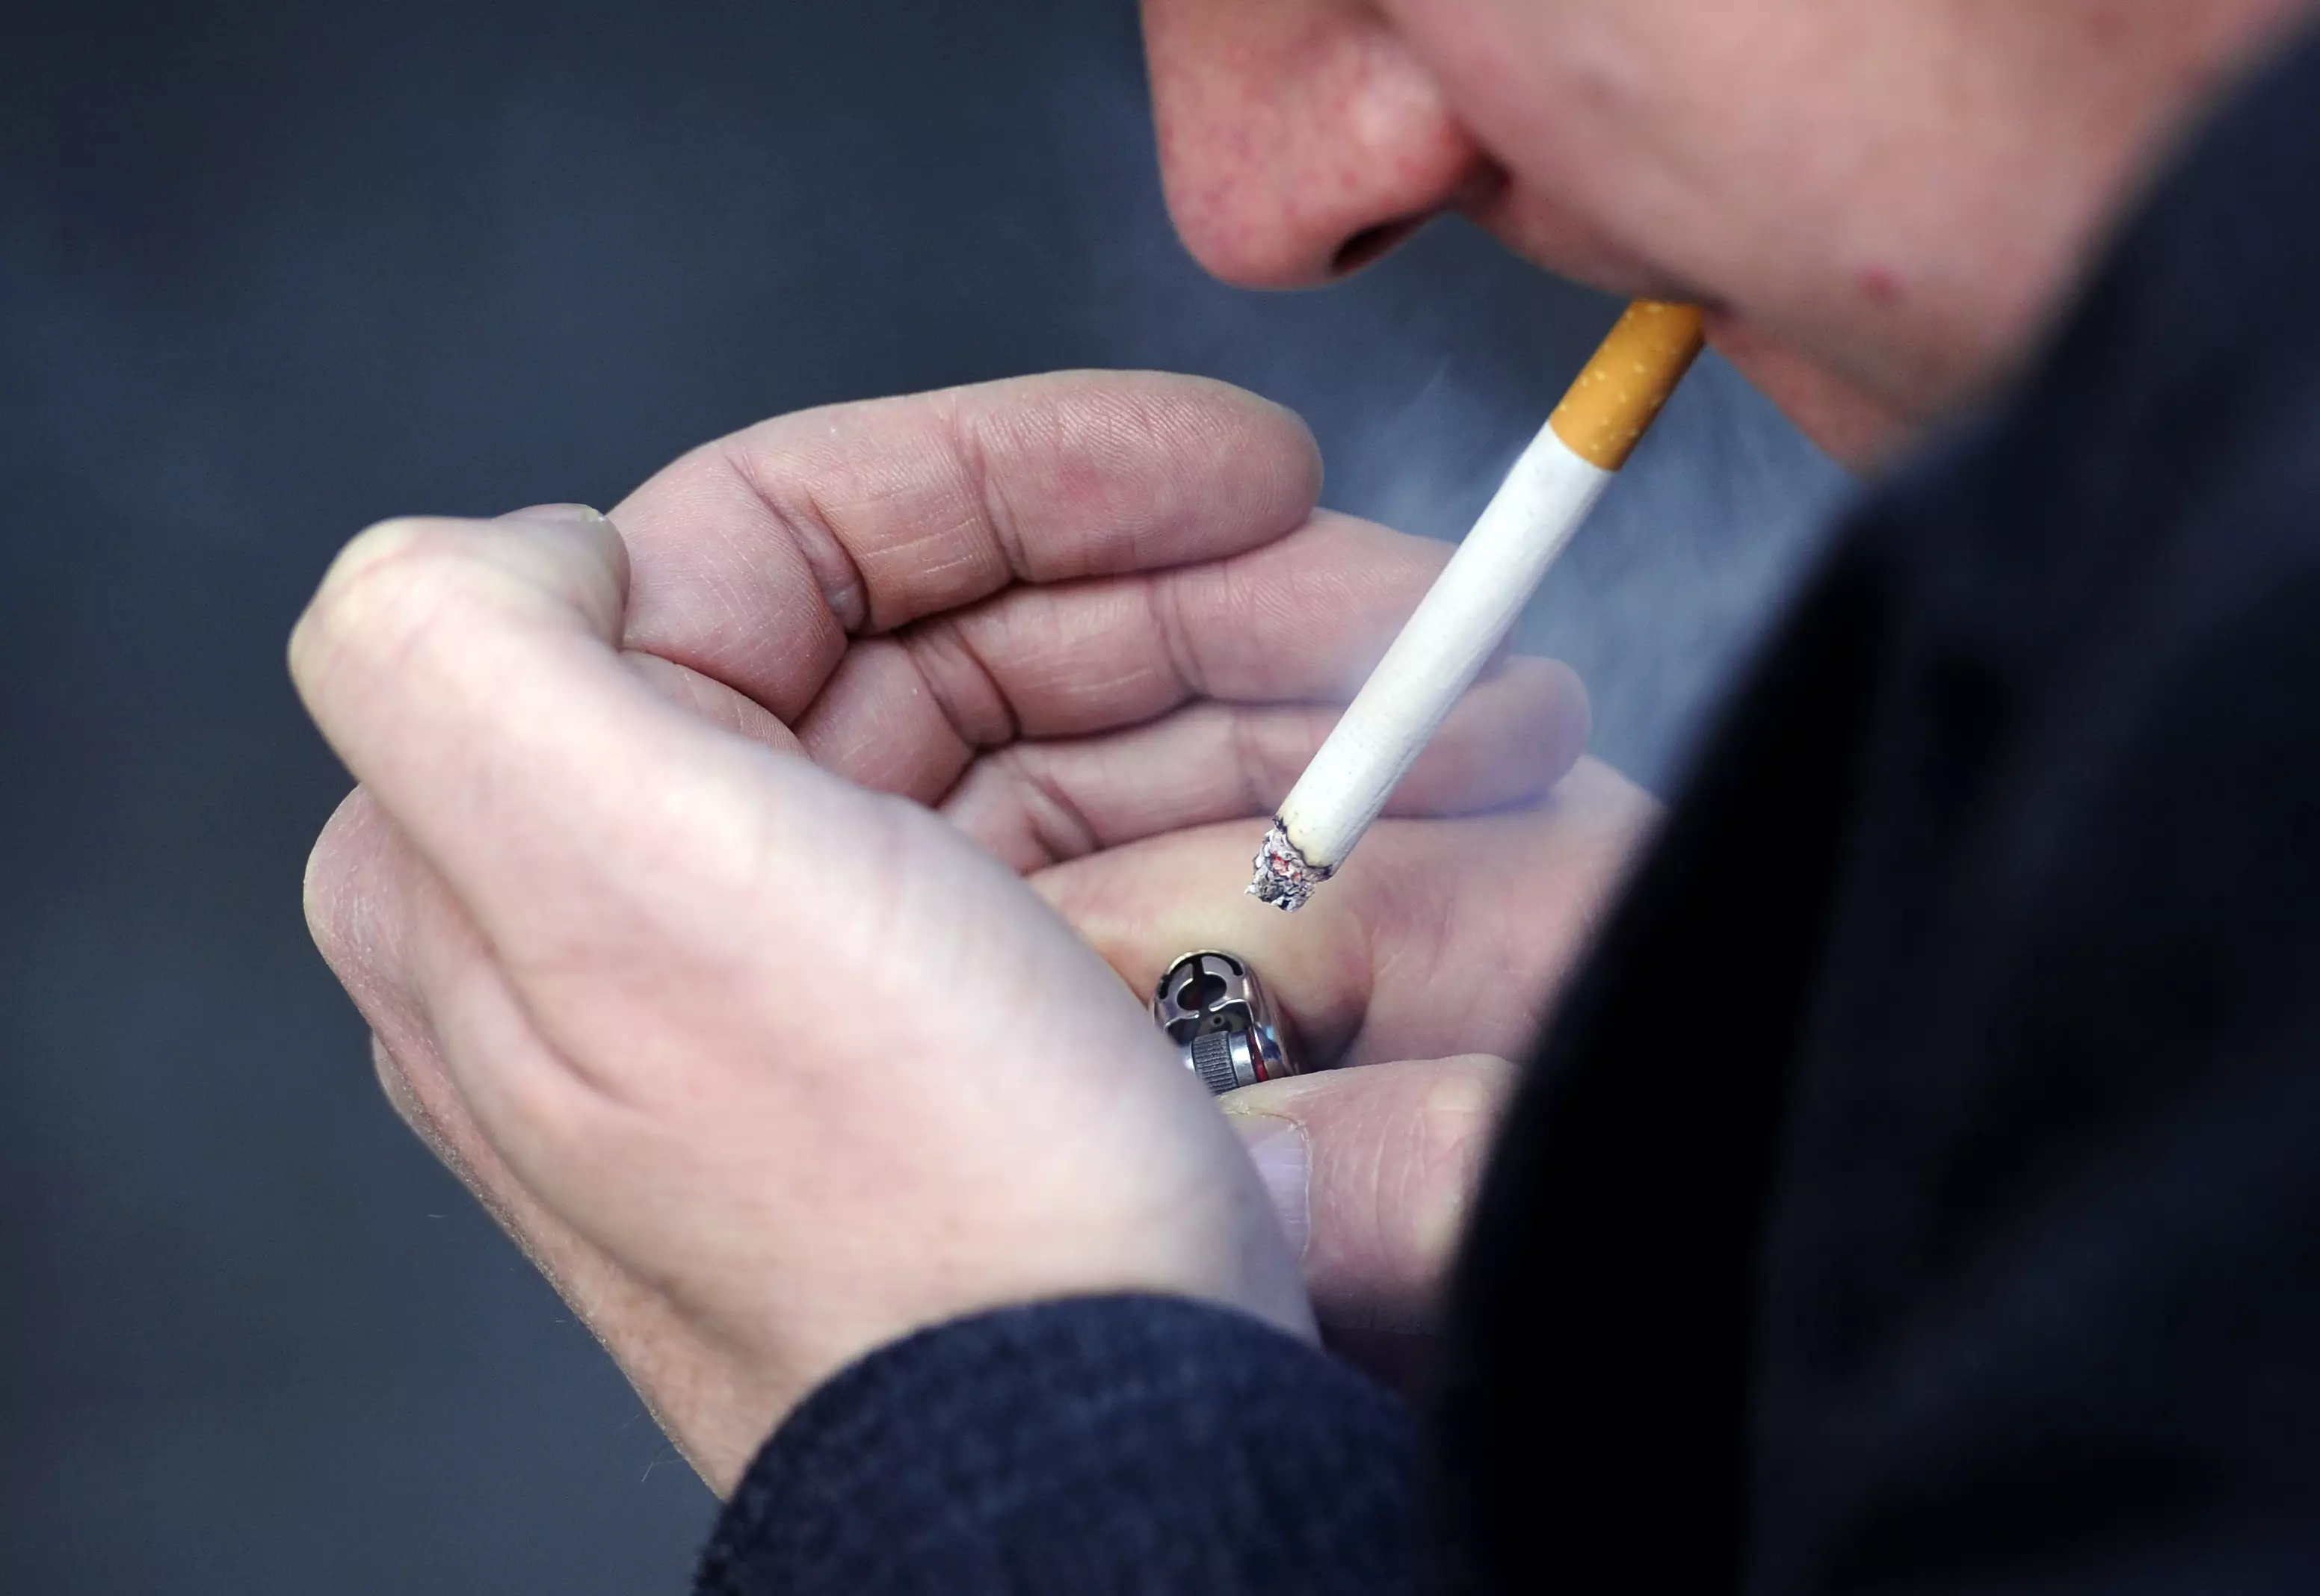 Cigarettes could be the cause of your 'shrinkage'.